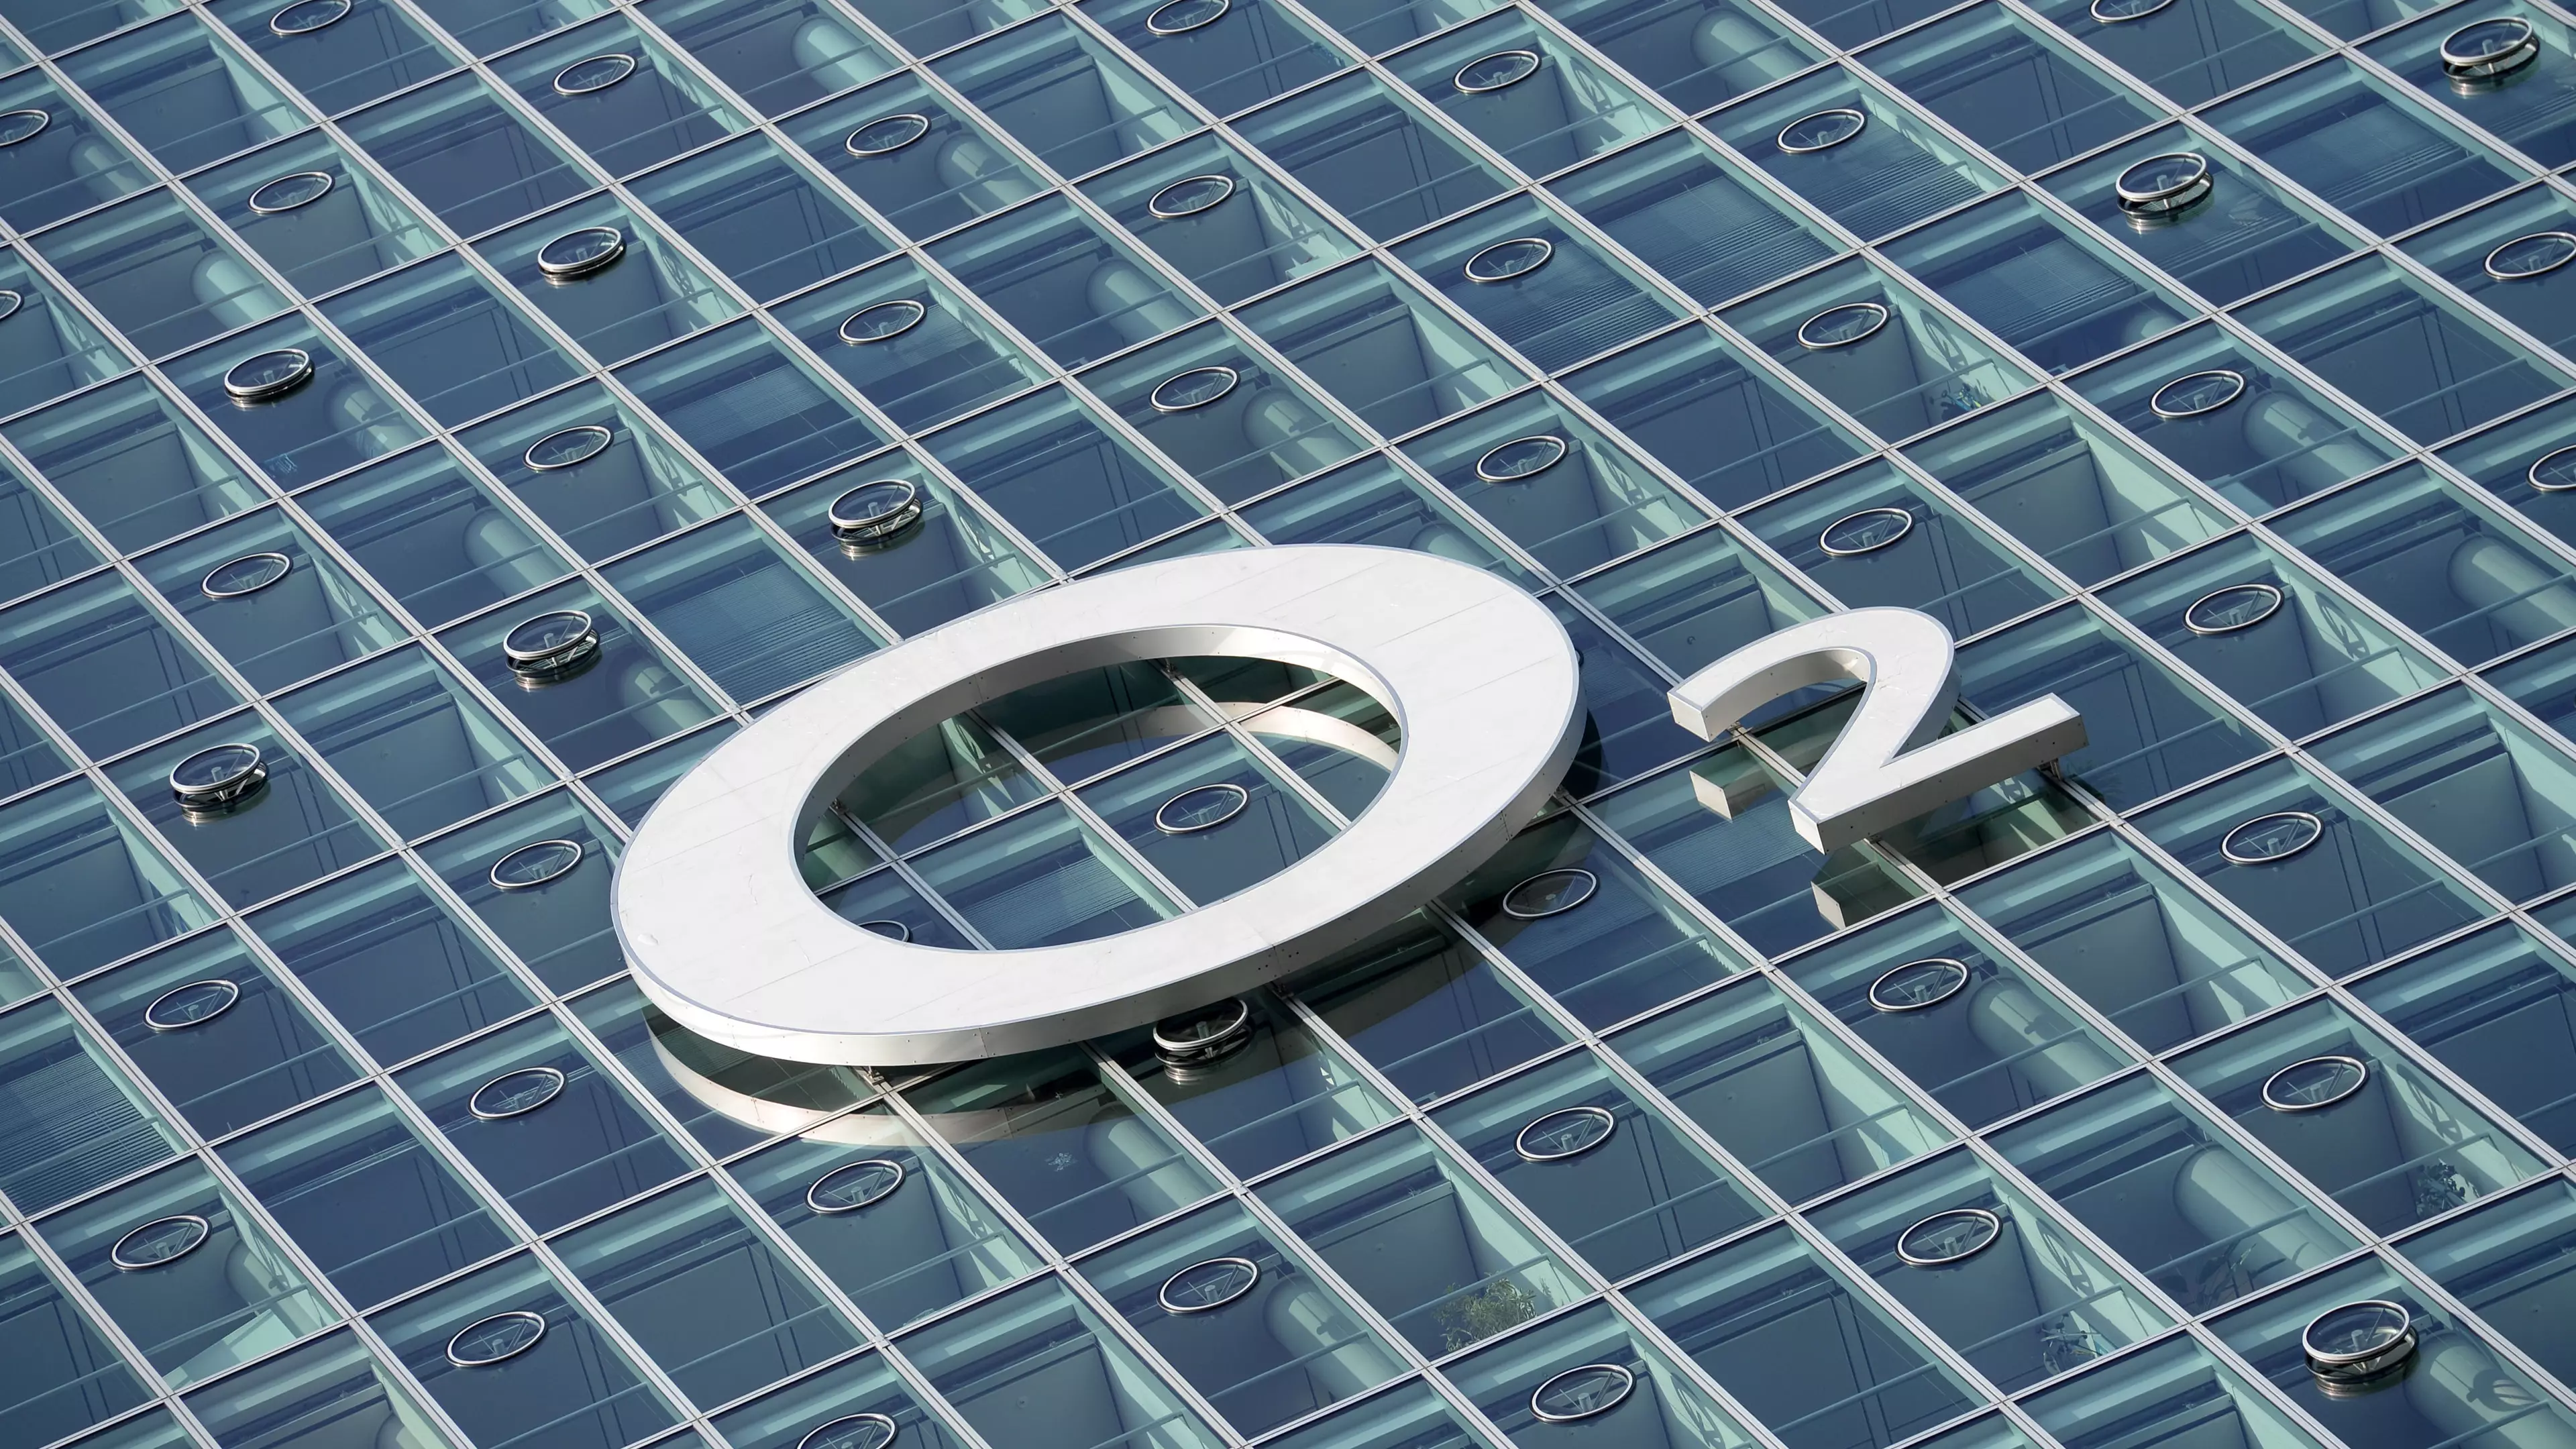 O2 Fined £10.5 Million For Overcharging 250,000 Customers Over Eight Years